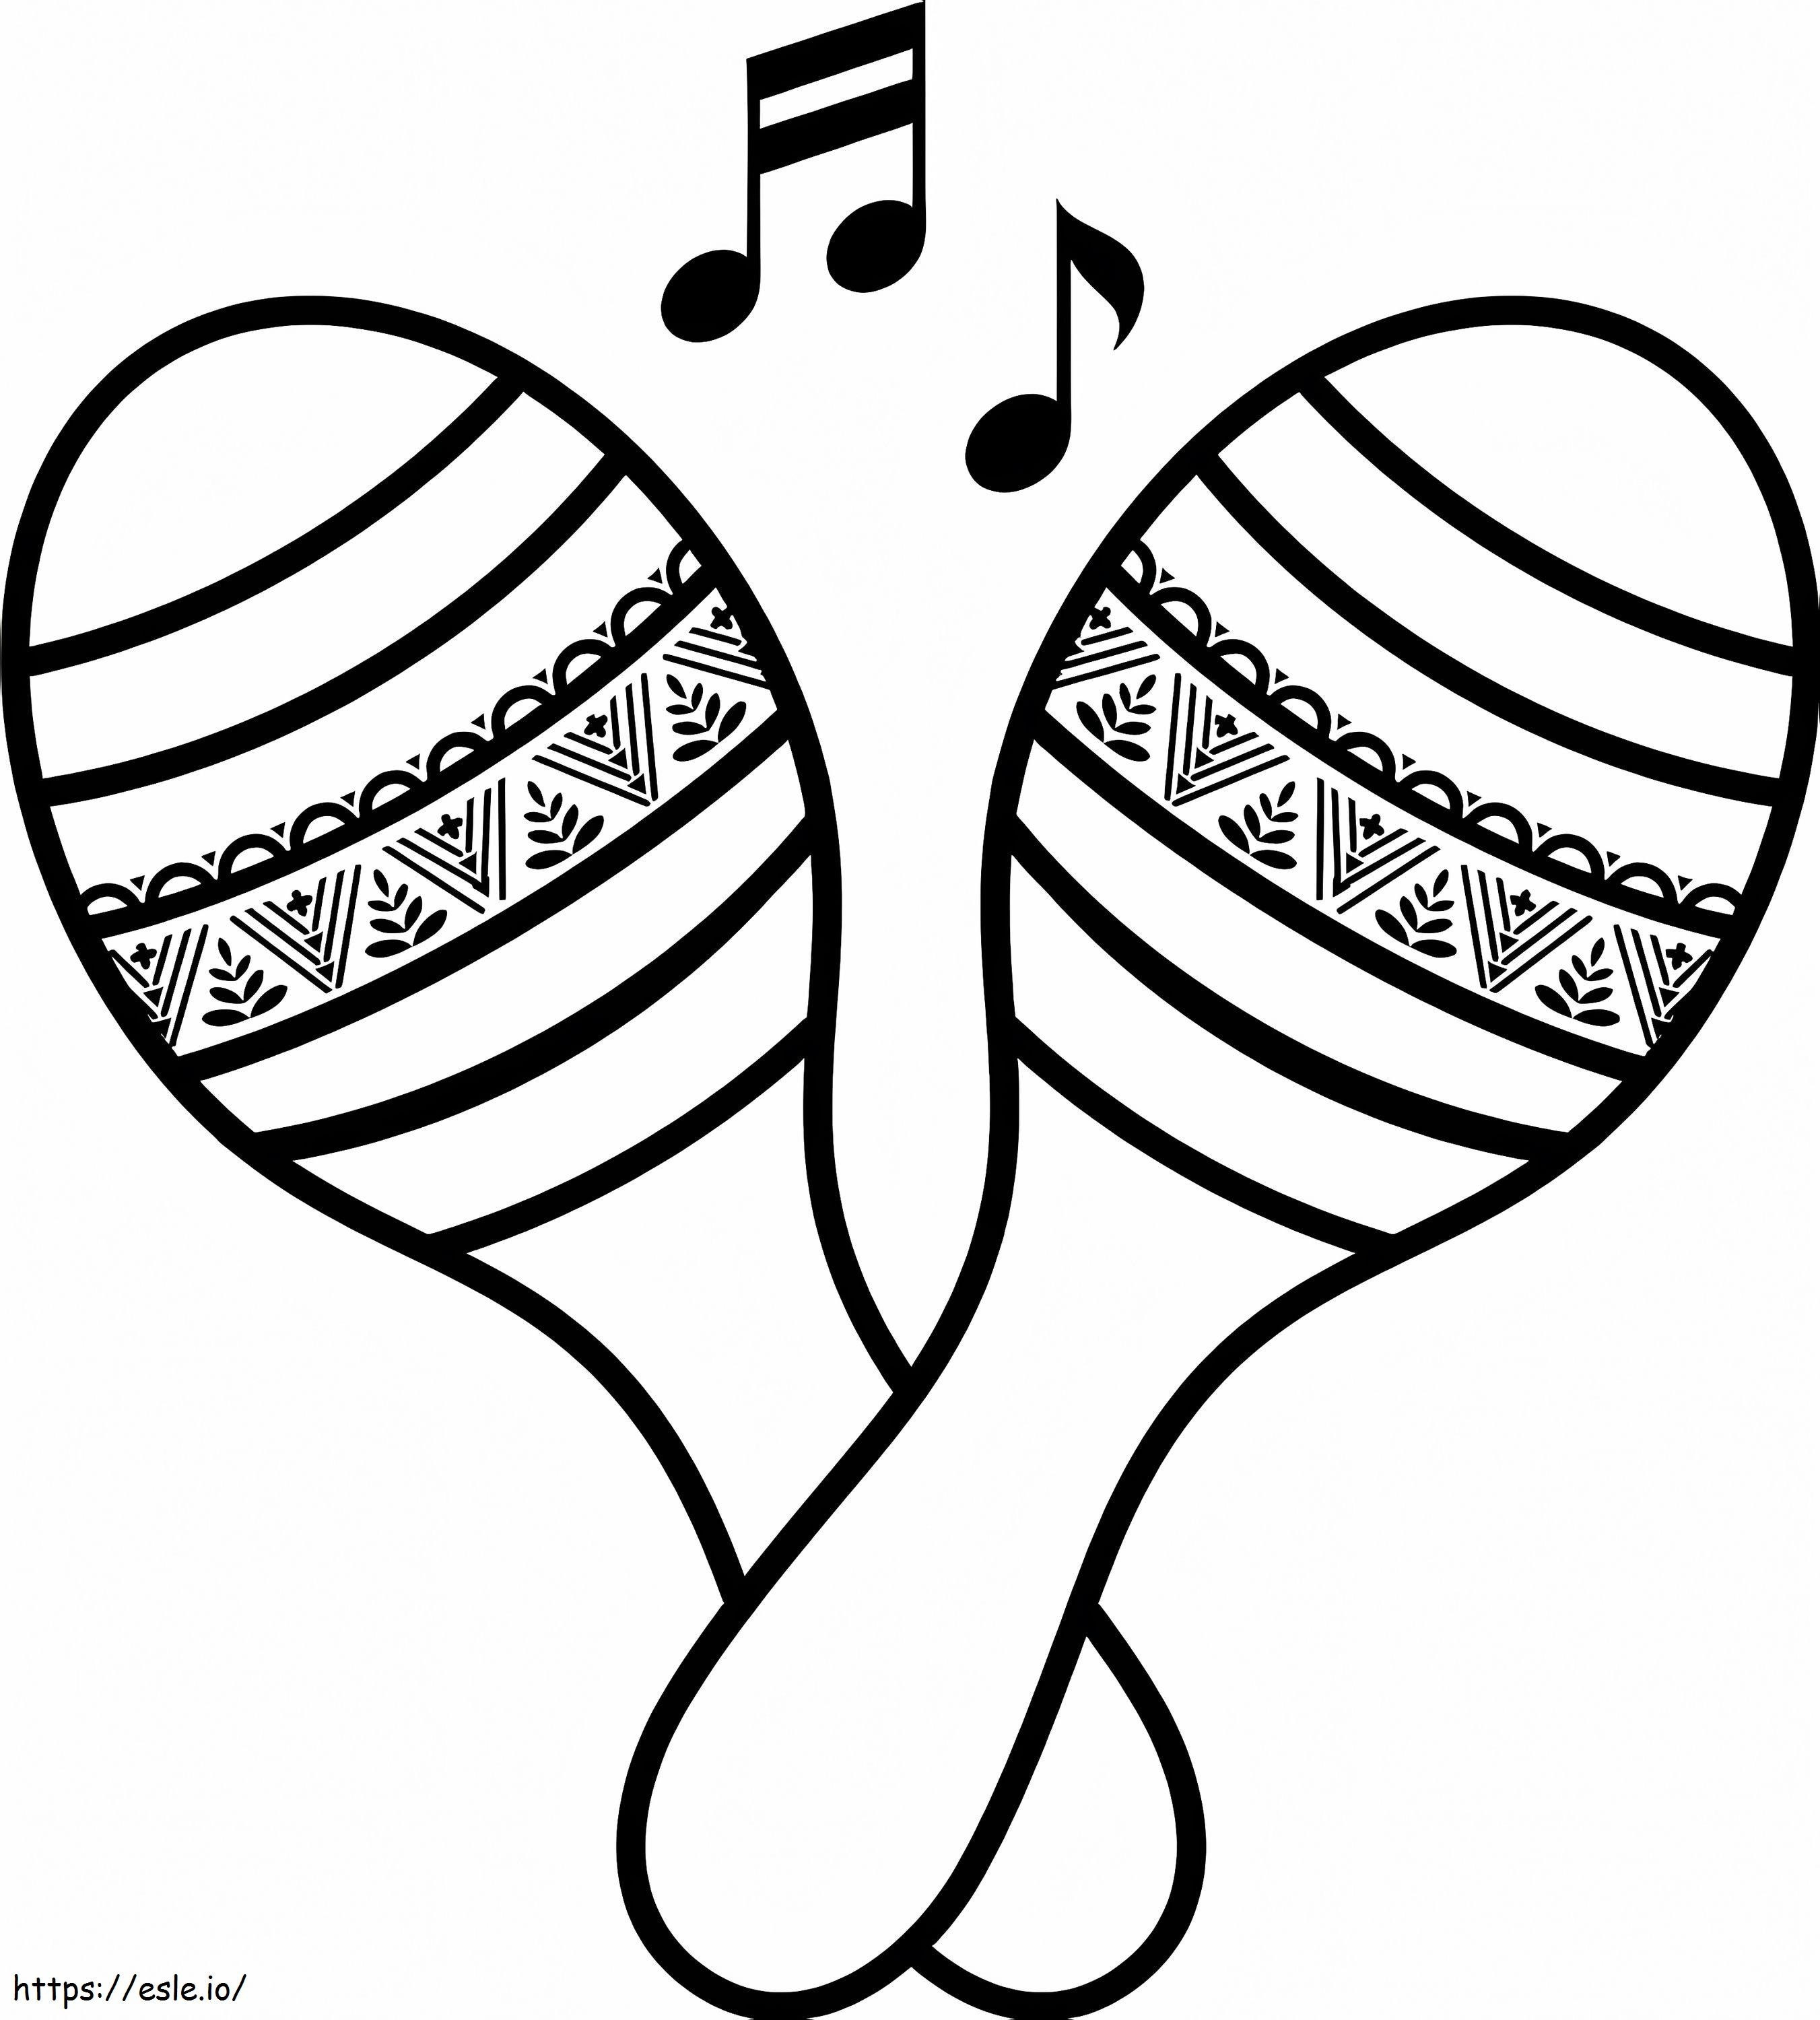 Music Maracas coloring page